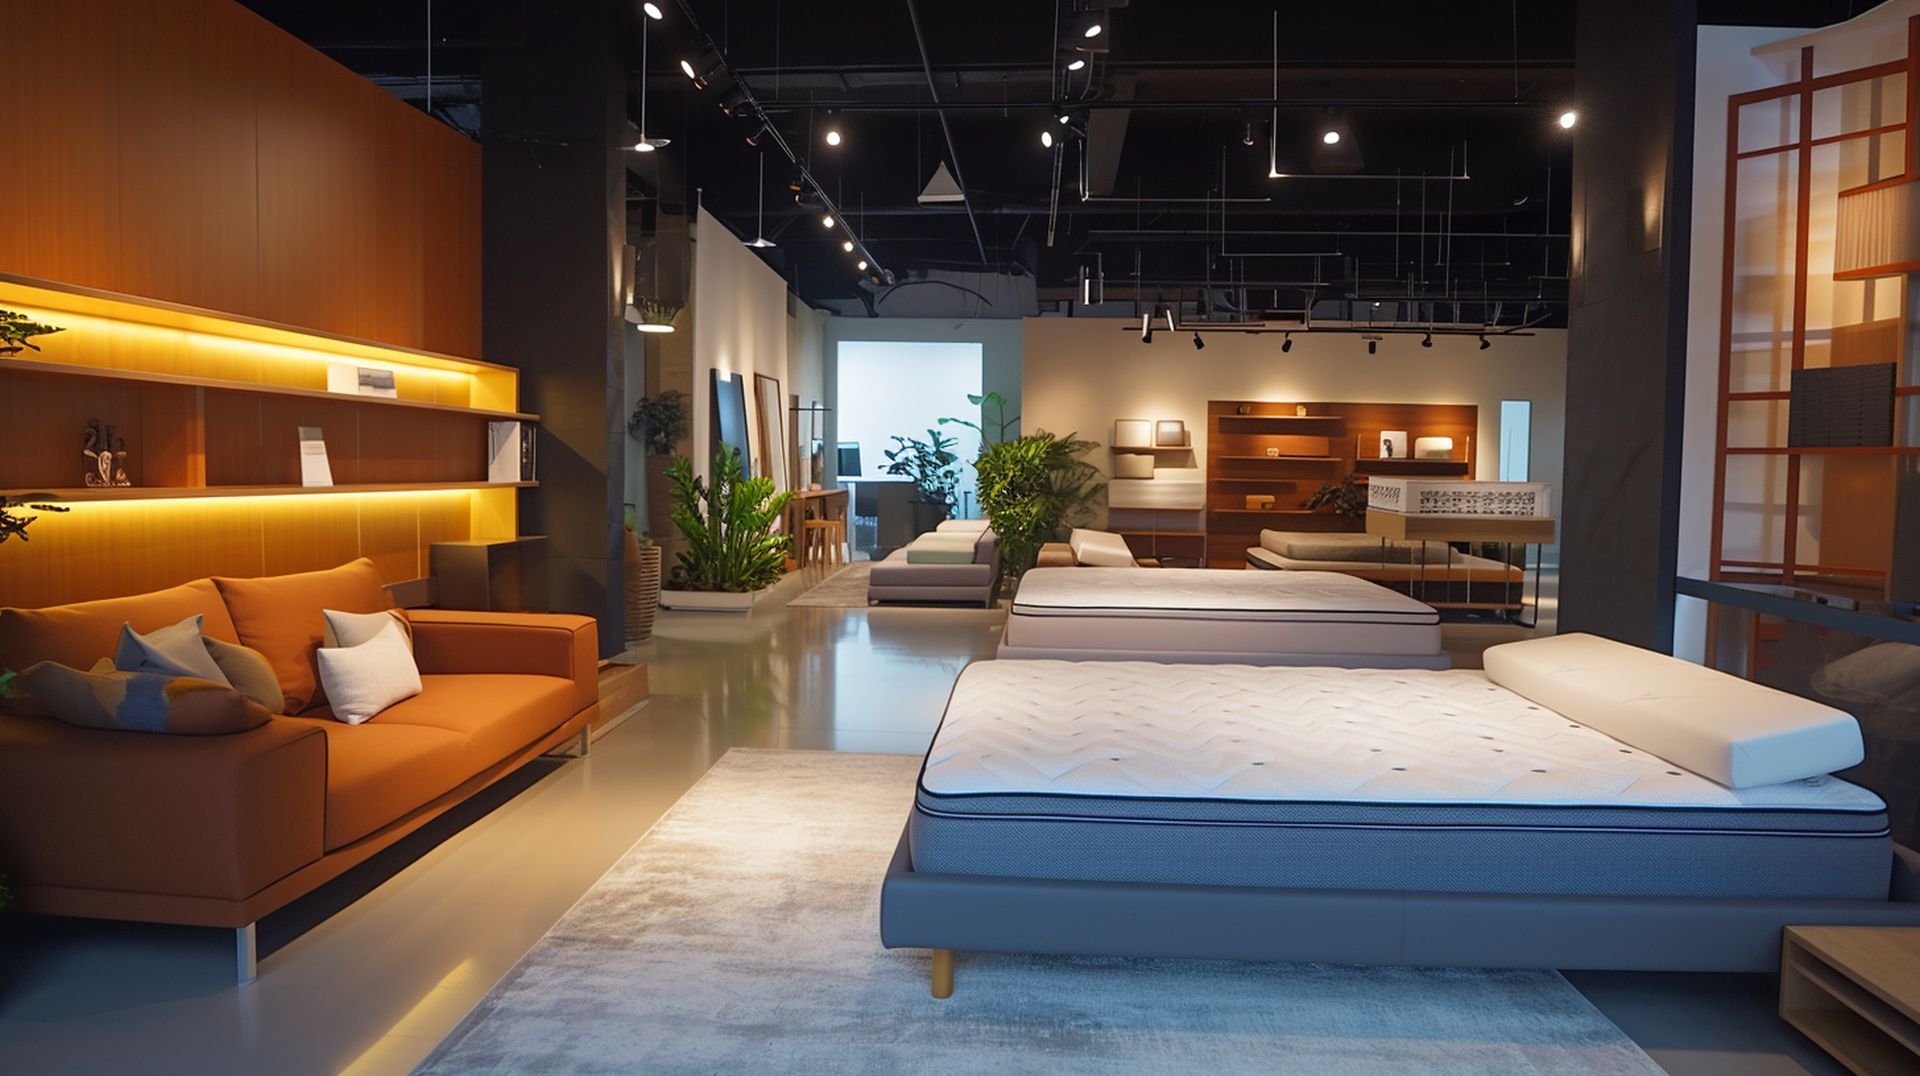 If you're looking for a new bed, mattress stores in Antioch offer the best customer and delivery service, financing, and warranties in California